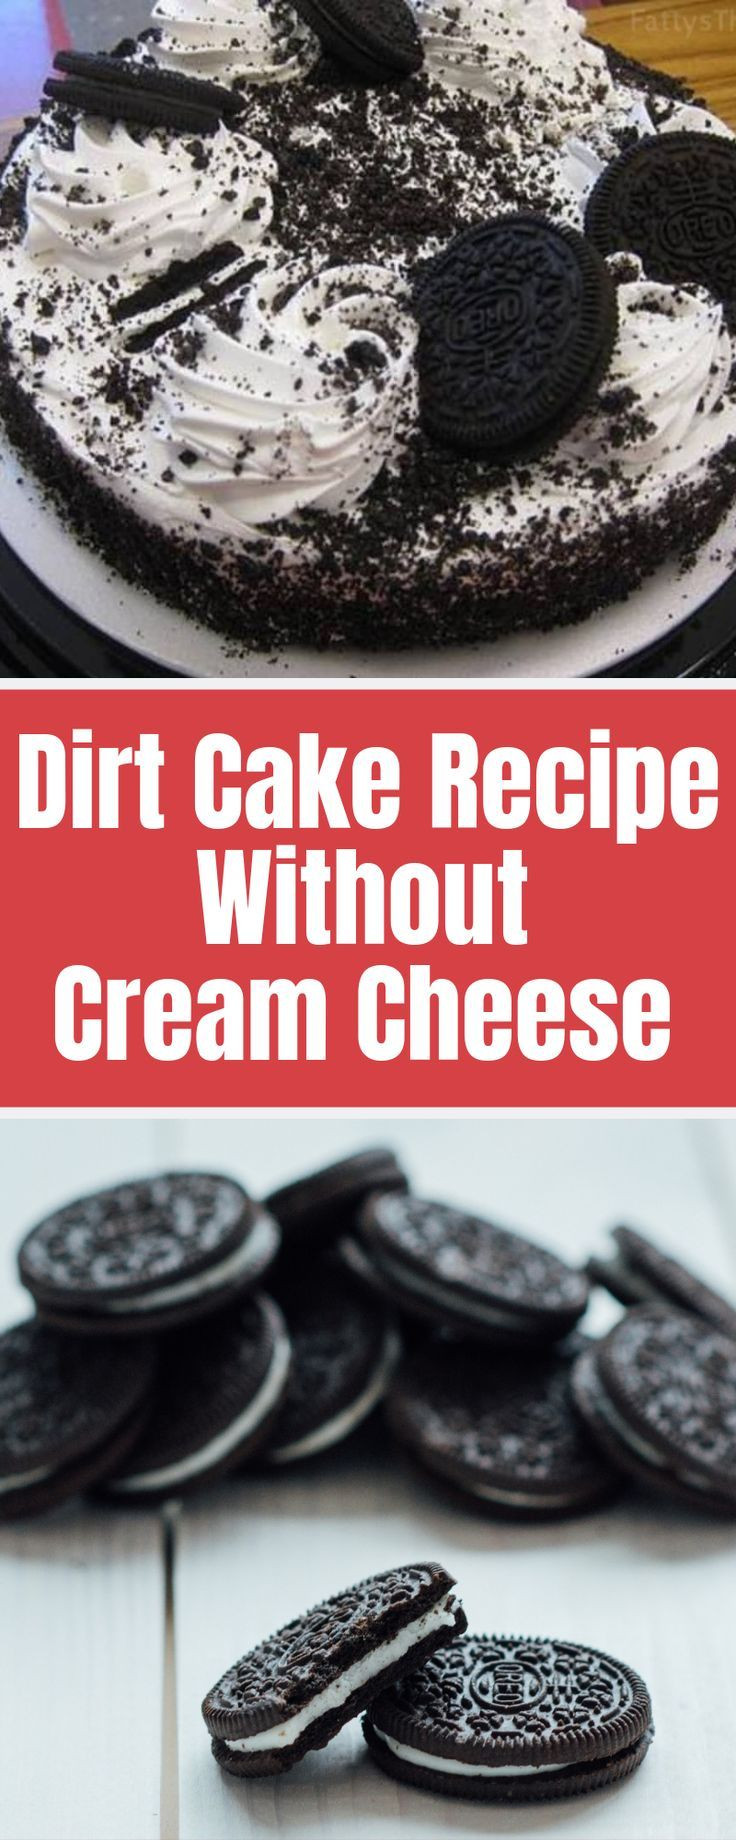 Dirt Cake Recipe Without Cream Cheese
 Dirt Cake Recipe Without Cream Cheese This Simple Recipe